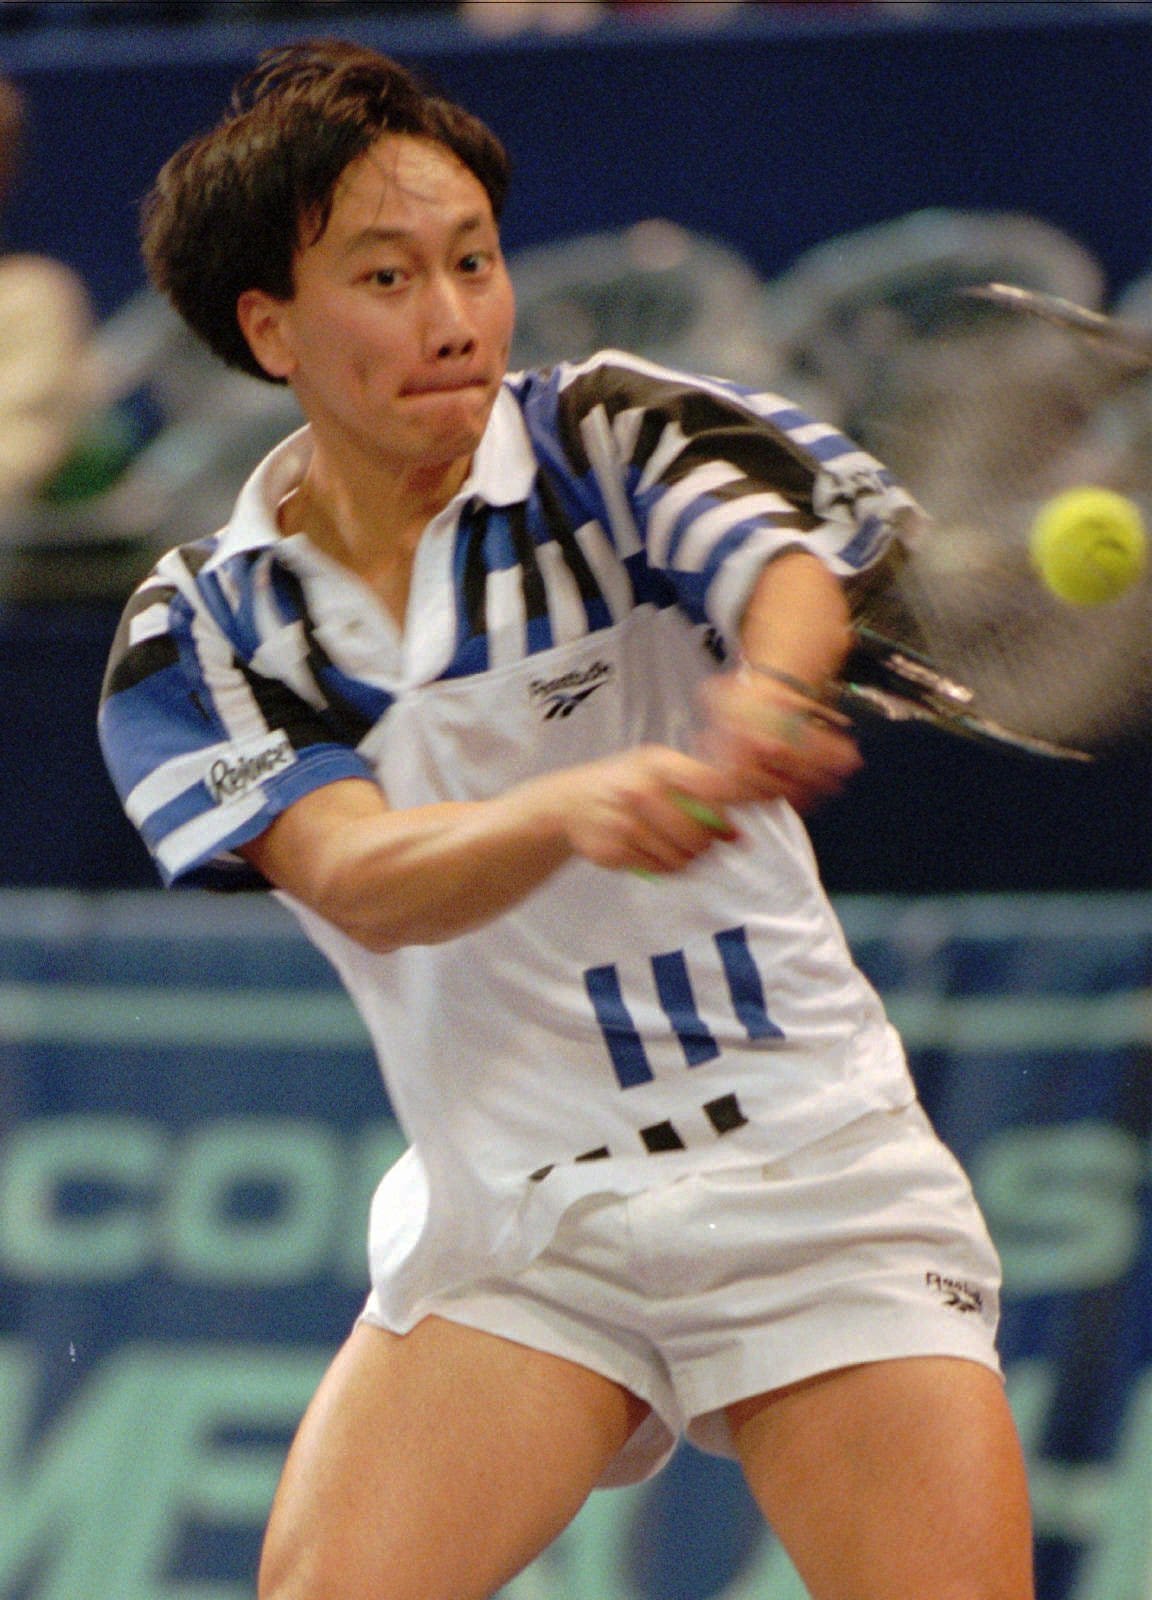 Former tennis great Michael Chang the focus of new ESPN documentary